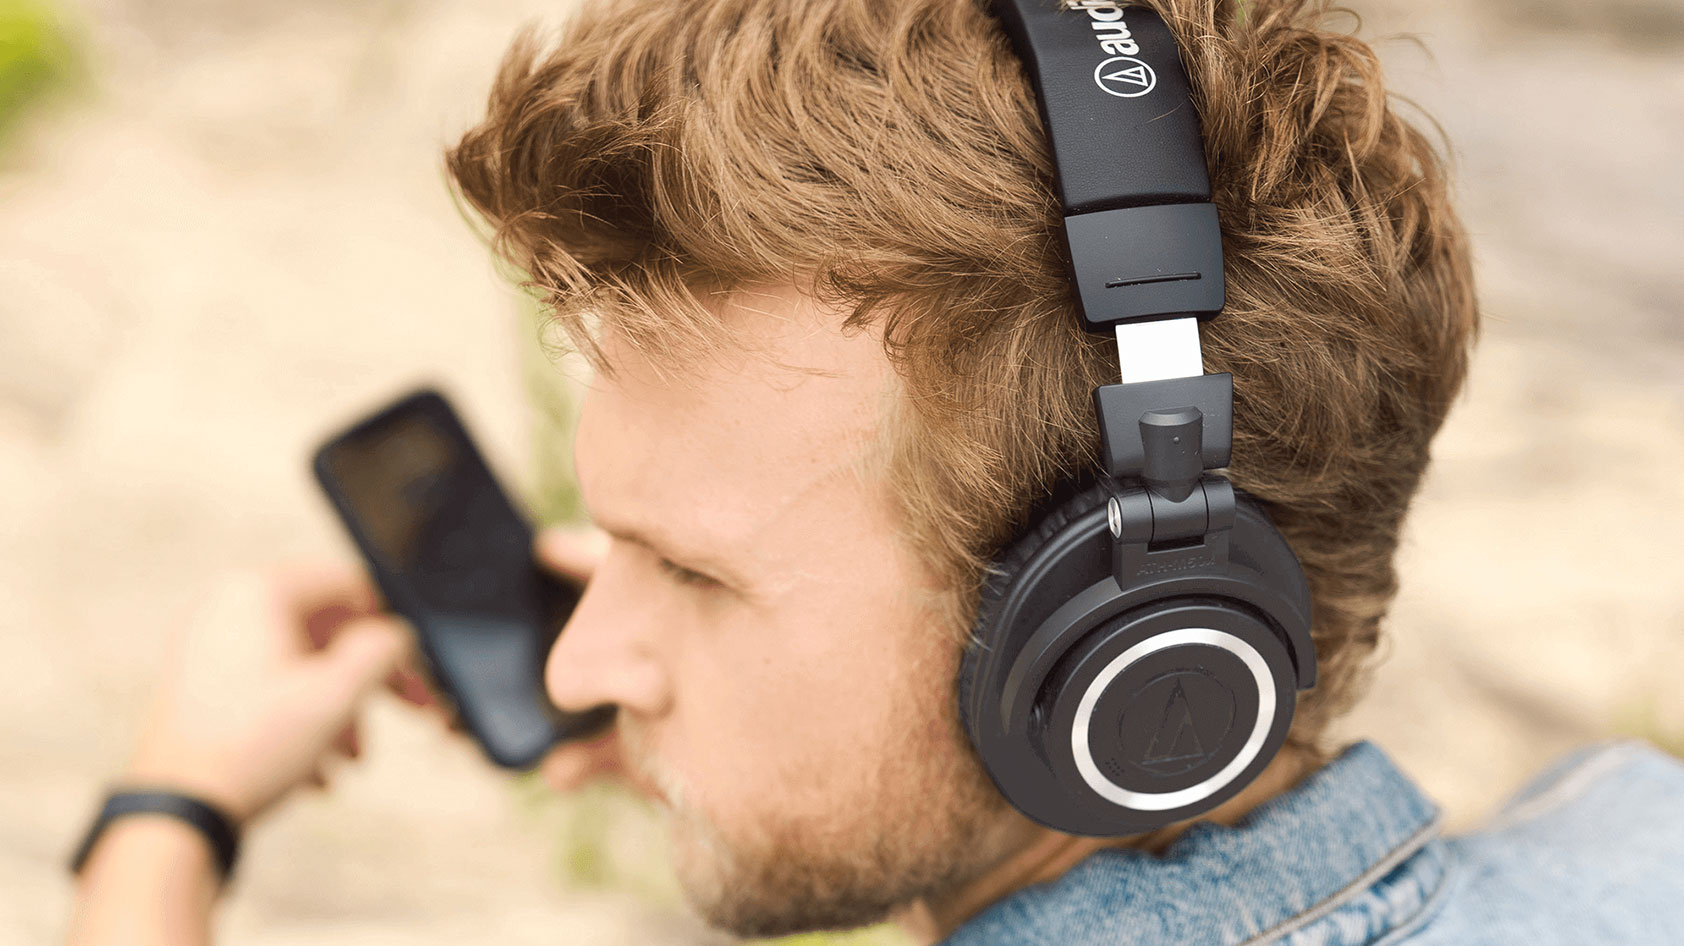 A man wears Audio Technica at m50xbt2 on the beach holding a smartphone.